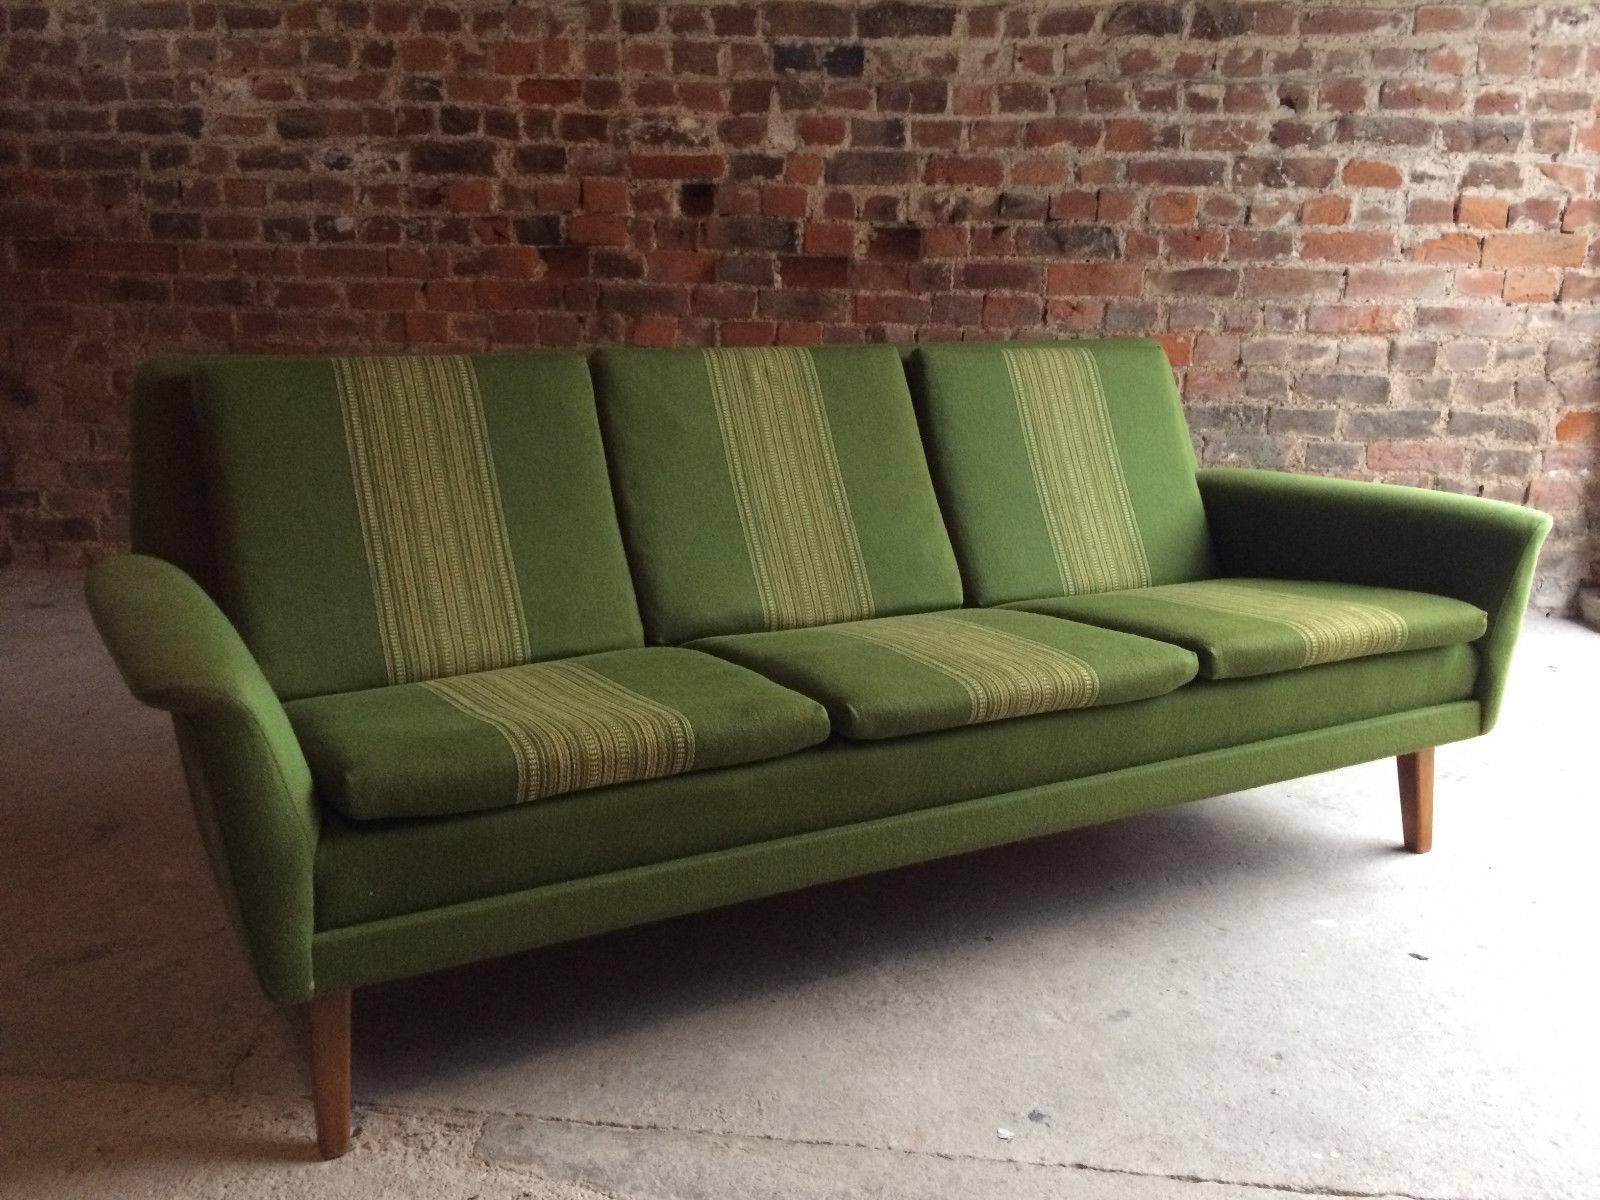 20th Century Midcentury Folke Ohlsson Three-Seat Sofa Made by Fritz Hansen for DUX, 1960s